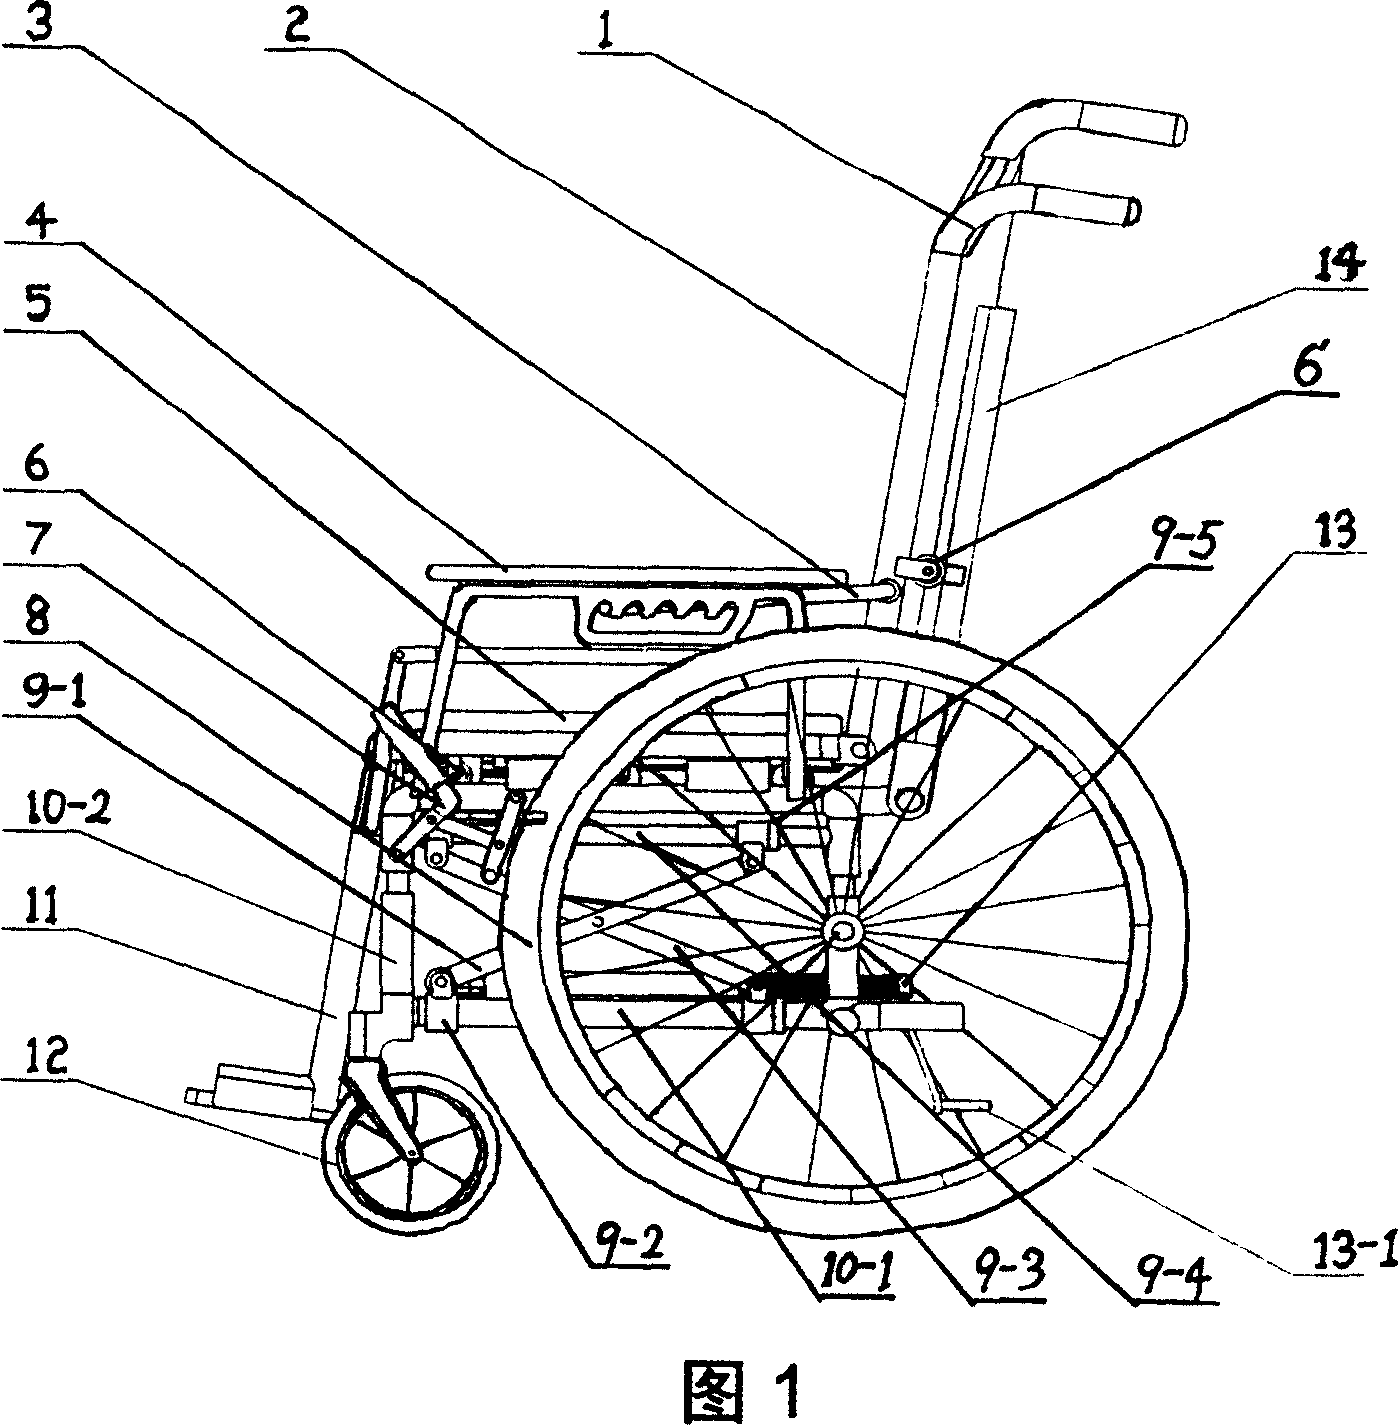 Liftable and movable wheelchair